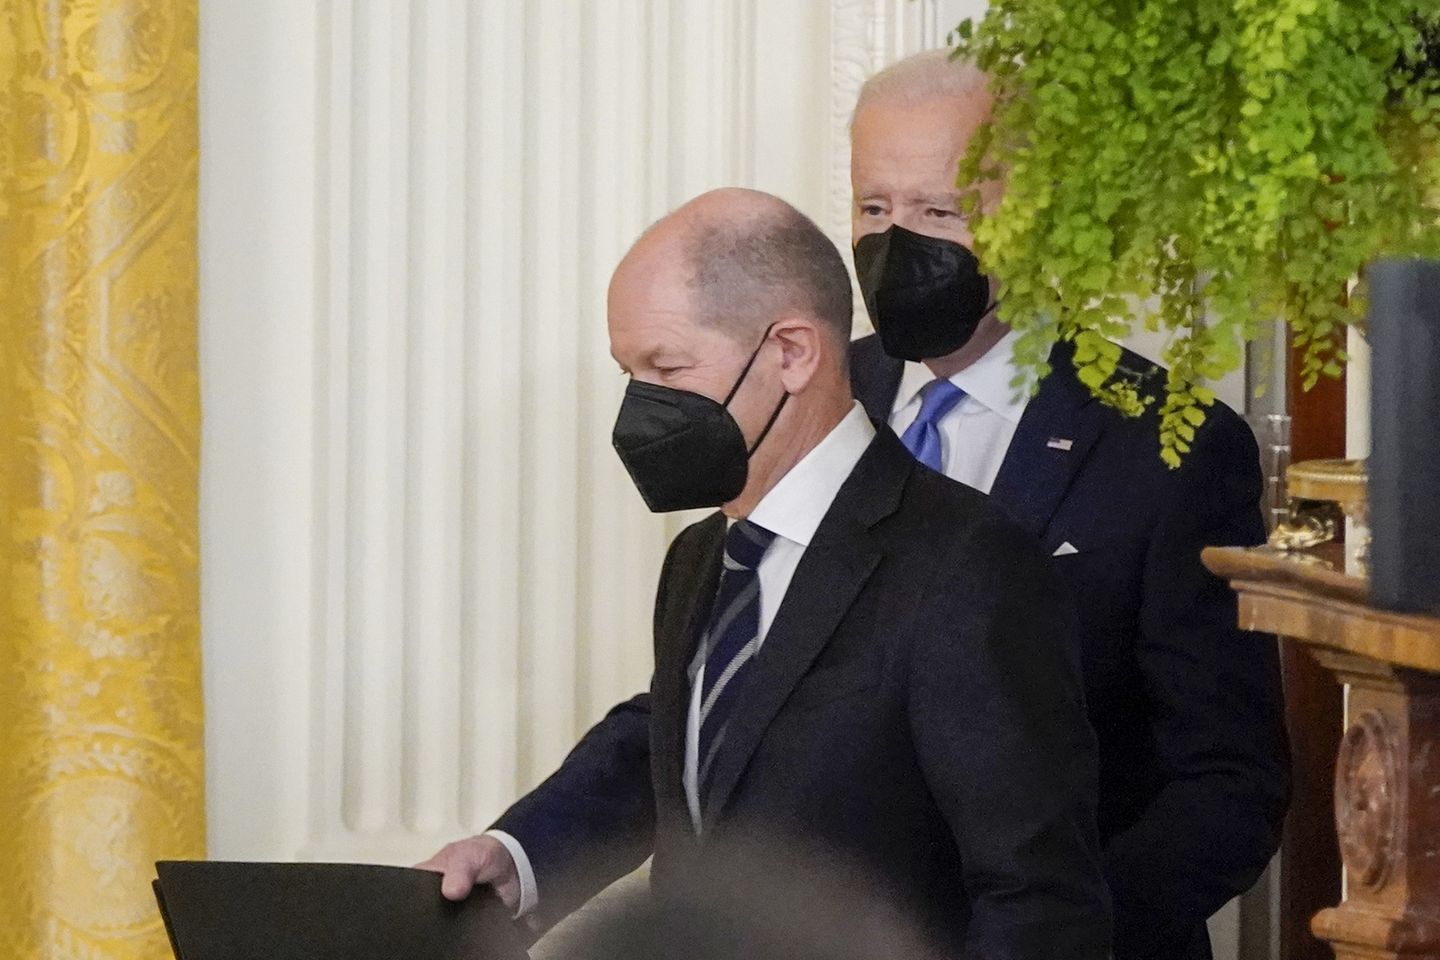 President Joe Biden and German Chancellor Olaf Scholz arrive for a news conference in the East Room of the White House, Monday, Feb. 7, 2022, in Washington. (AP Photo/Alex Brandon)